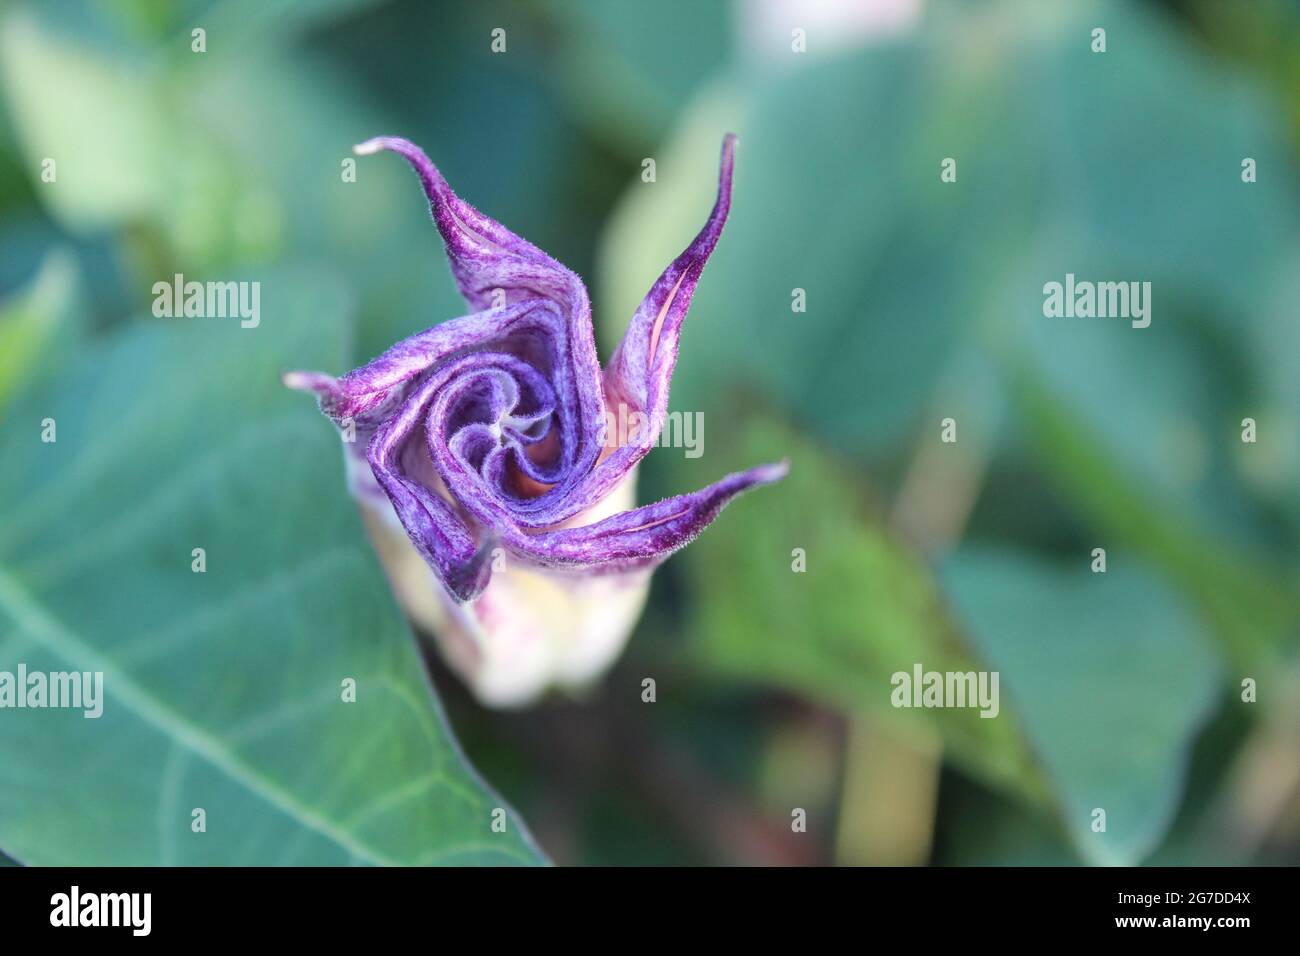 Datura metal plant flower, top view Stock Photo